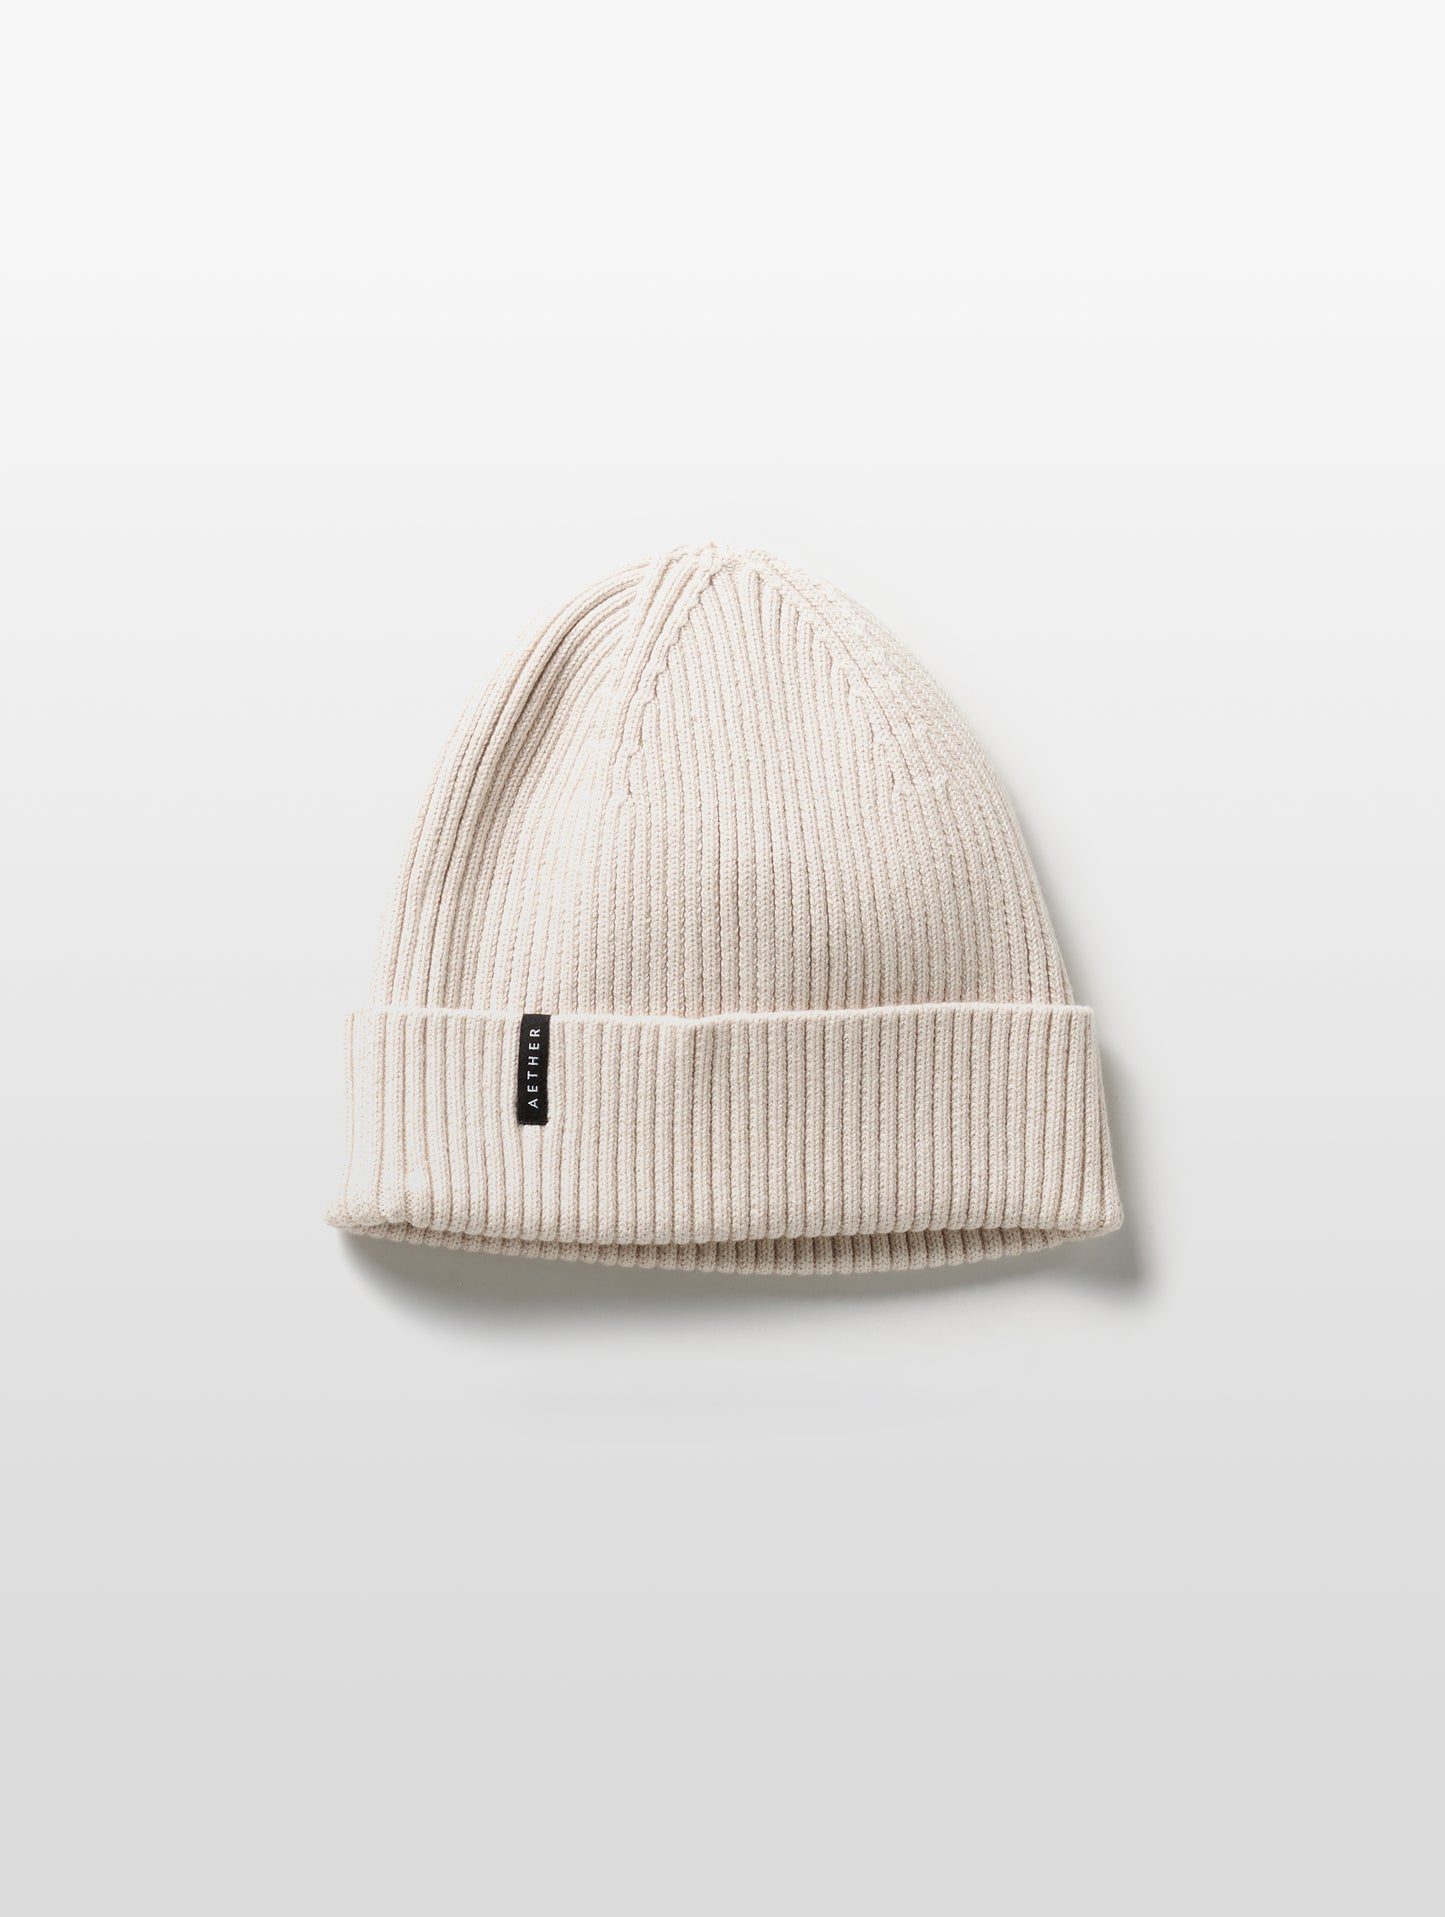 white cotton beanie from AETHER Apparel